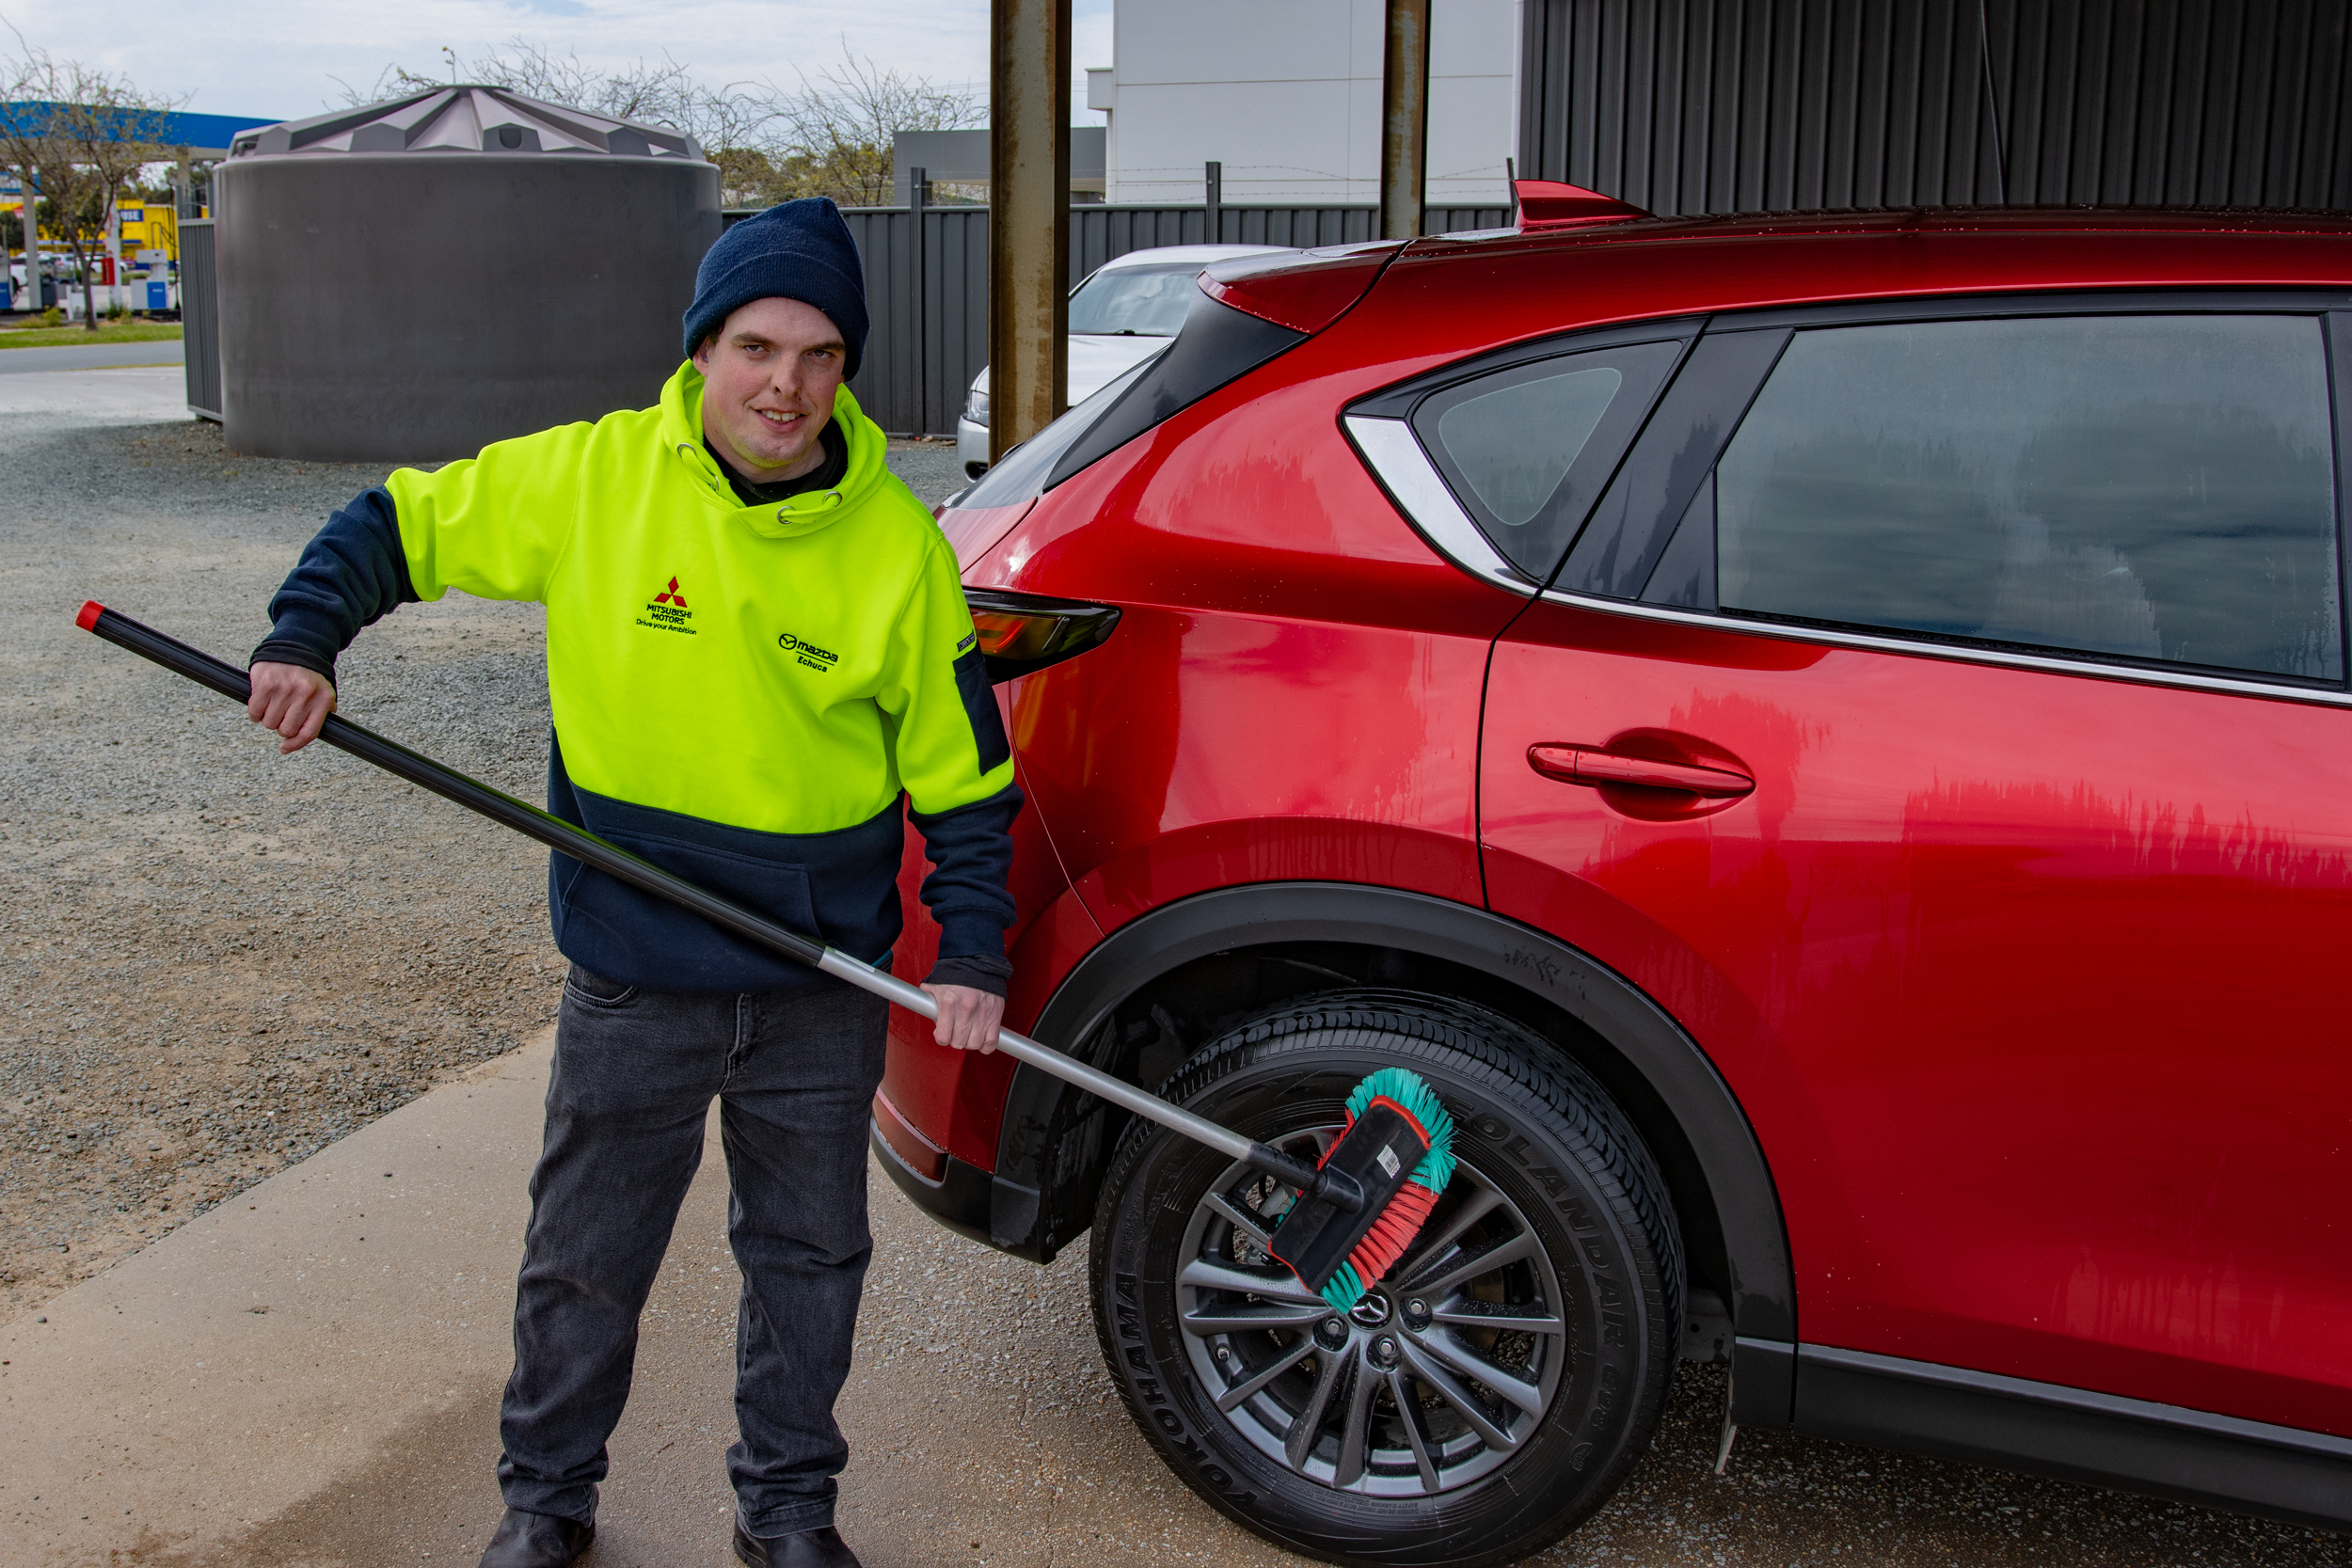 Young man in beanie and yellow jumper smiling as he holds a car cleaning brush that he is using to clean a red SUV.